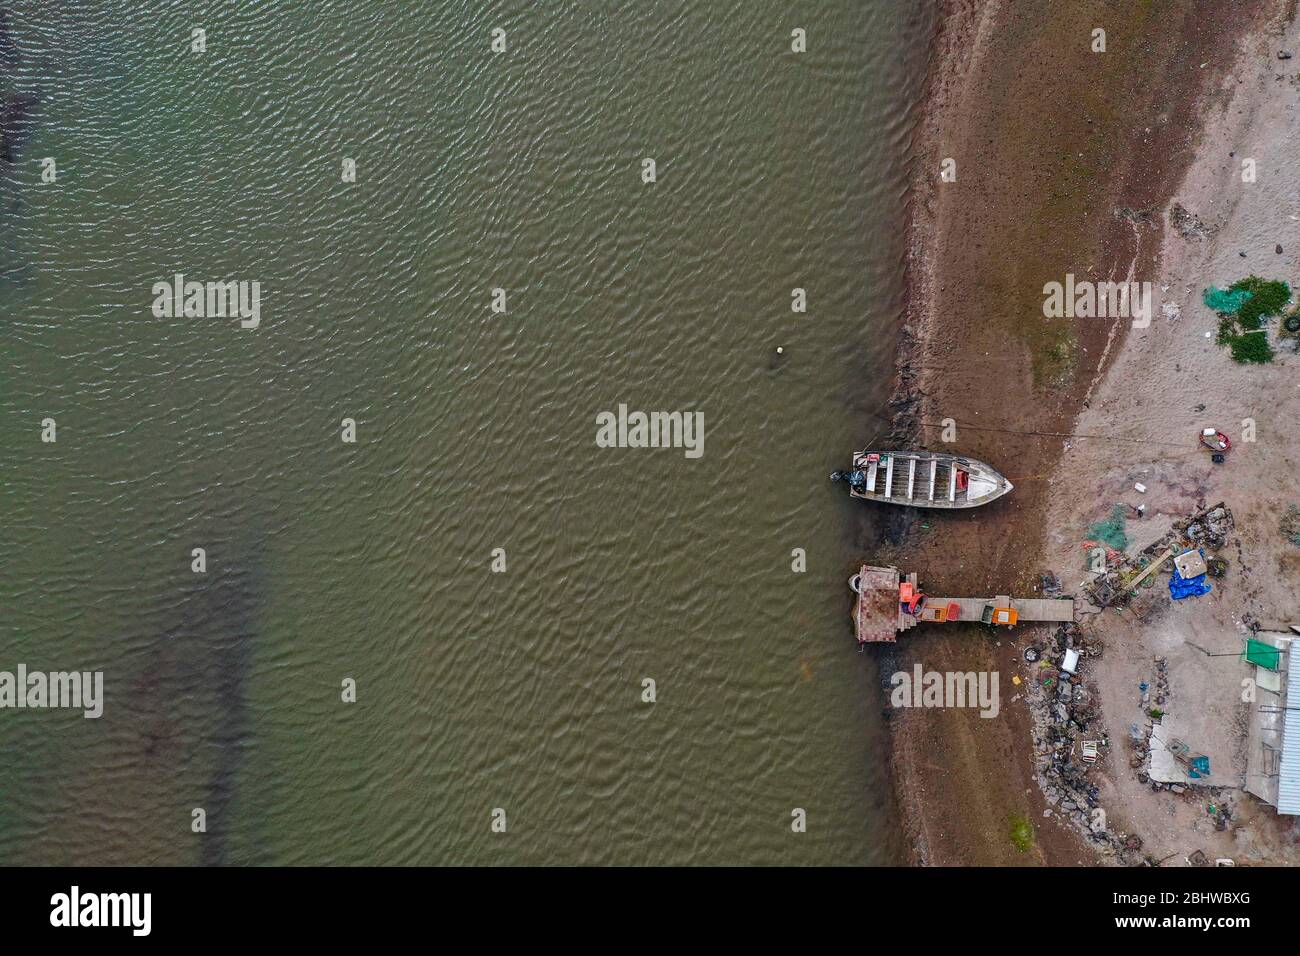 Aerial aerial view, pangas and fishing boat and austere dock on the shore of the estuary and beach of the fishing community Tastiota Sonora, Mexico. Sonora Desert, Gulf of California. Aerial shot, aerial photography. fishing nets, water channels.. vista aerea cenital, pangas y bote de pesca y muelle austero a la orilla del estero y playa de la comunidad de pescadores Tastiota Sonora, Mexico. desierto de Sonora, golfo de California. Plano cenital, fotografia aerea. redes de pesca, canales de agua, (Photo:LuisGutierrez/NortePhoto.com) Stock Photo